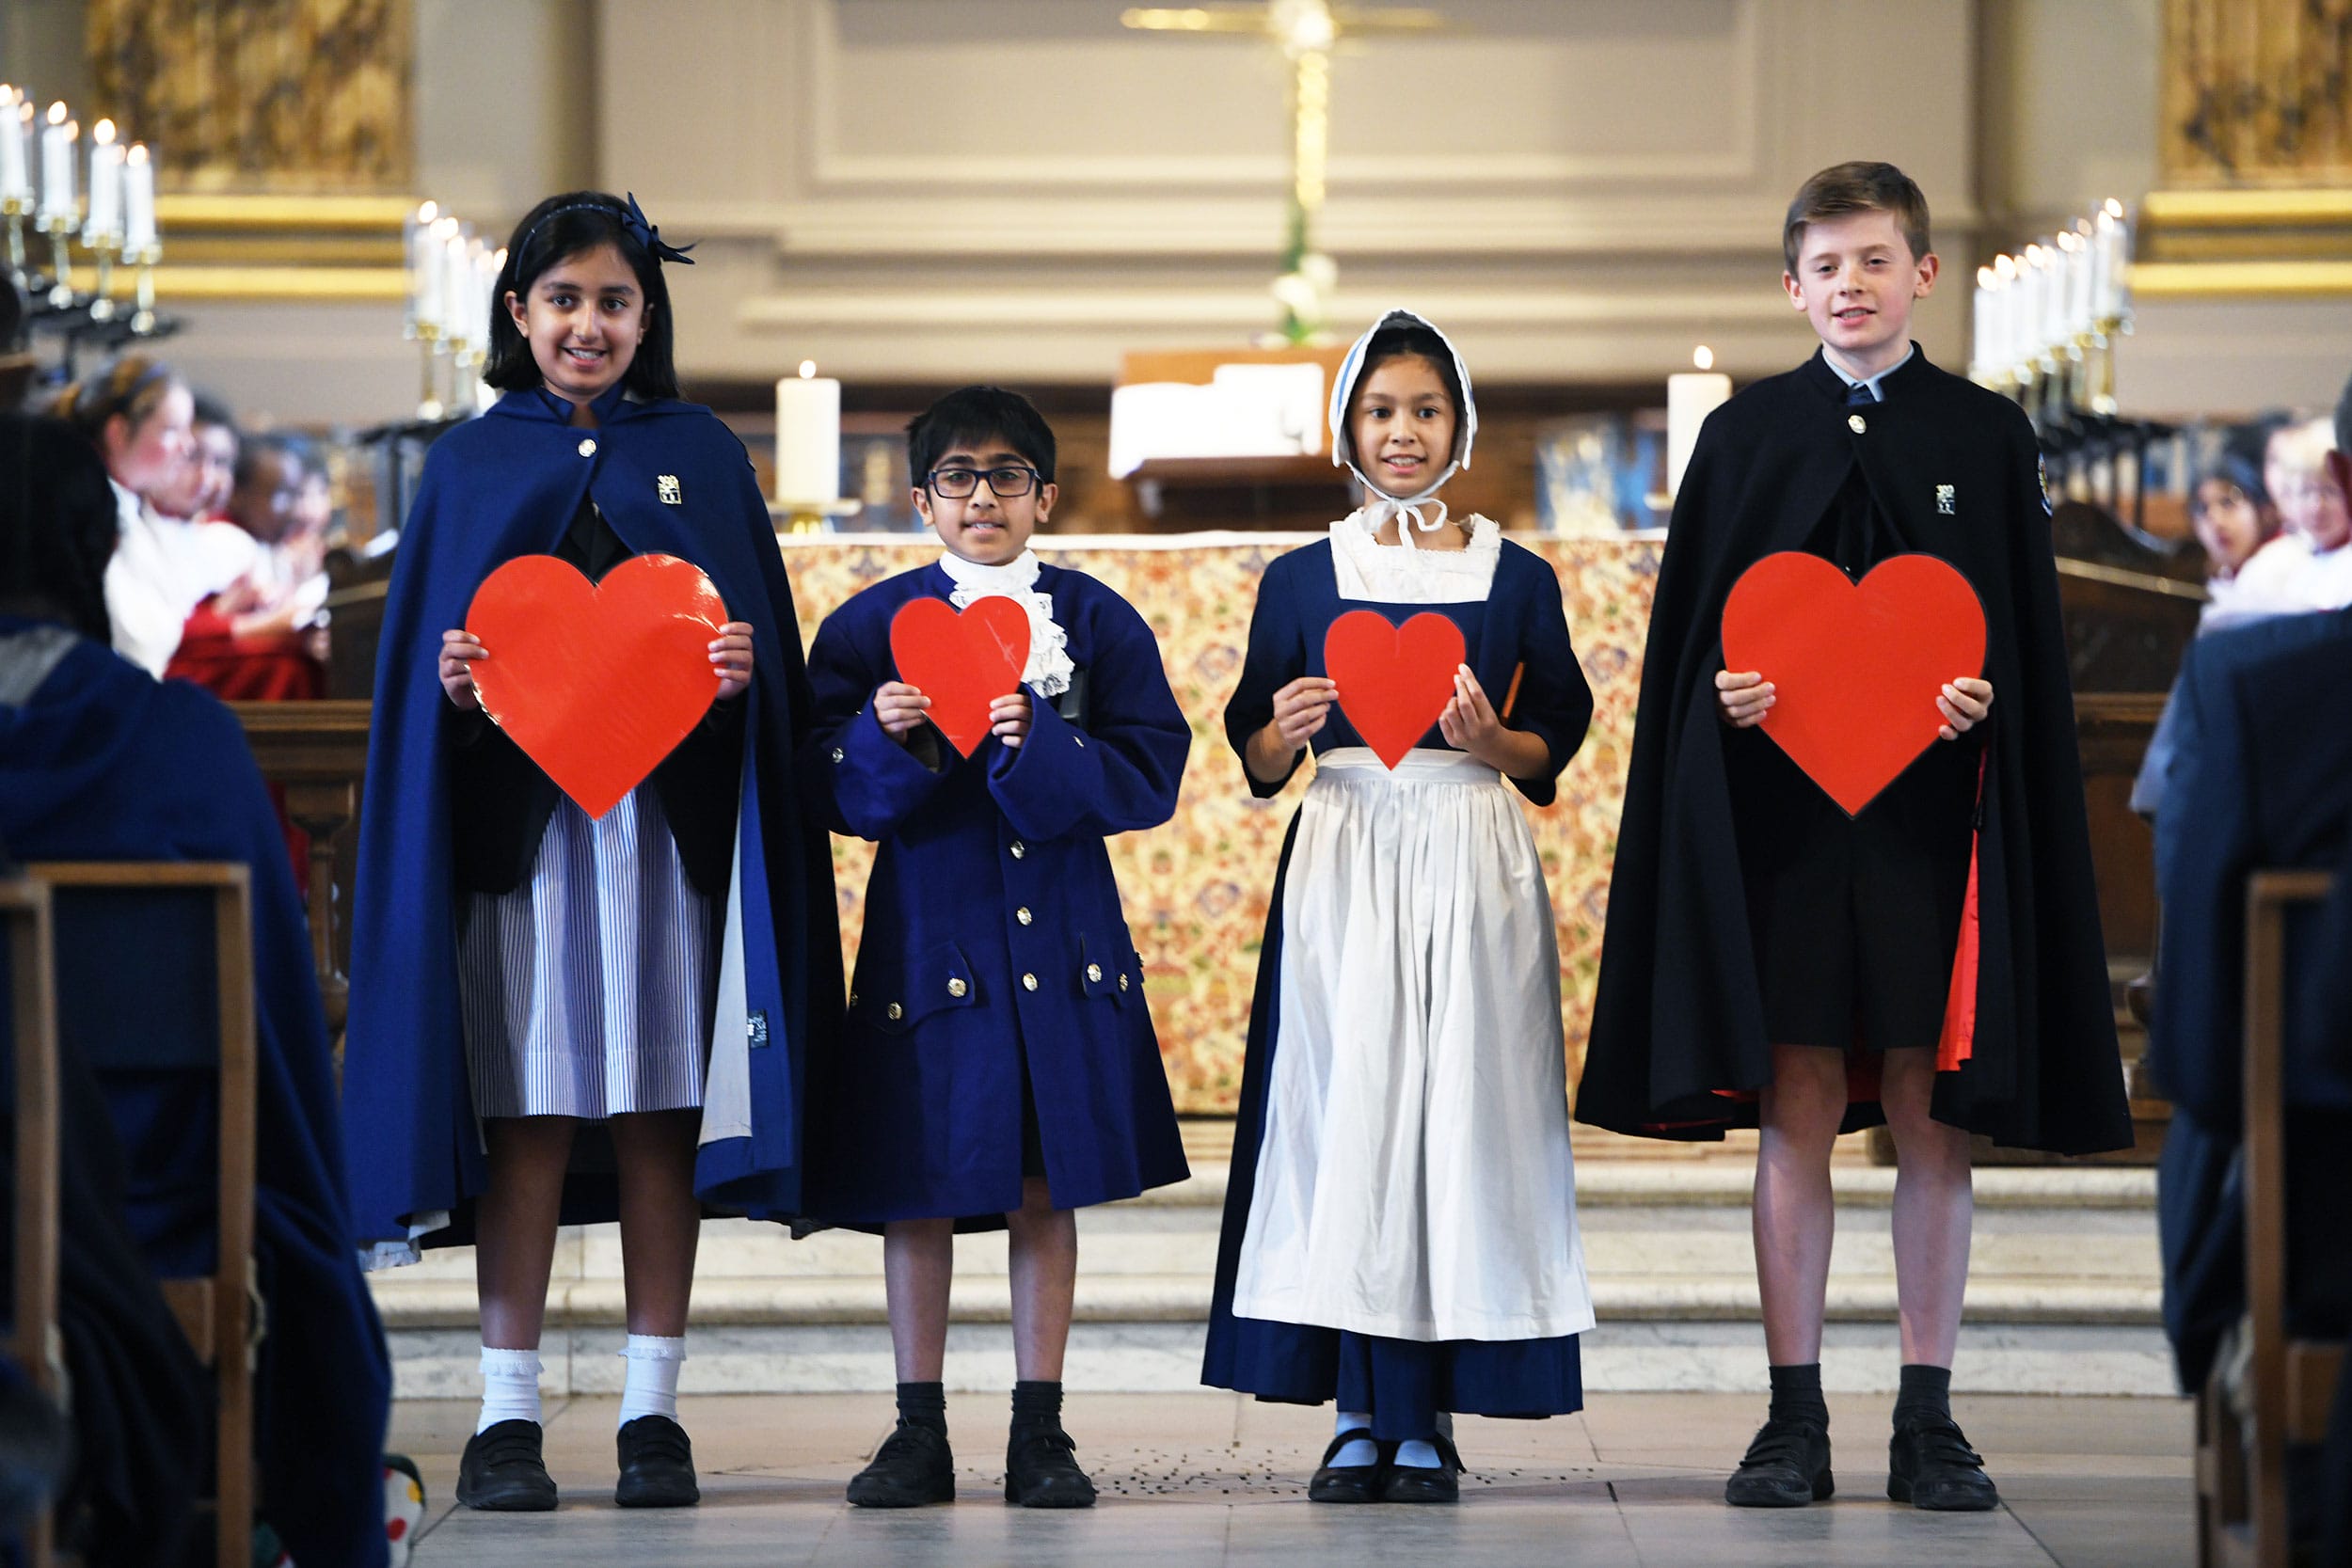 Four pupils stand in St Philips' Cathedral dressed in different outfits representing the School's history, holding paper hearts to symbolise the Blue Coat Values.